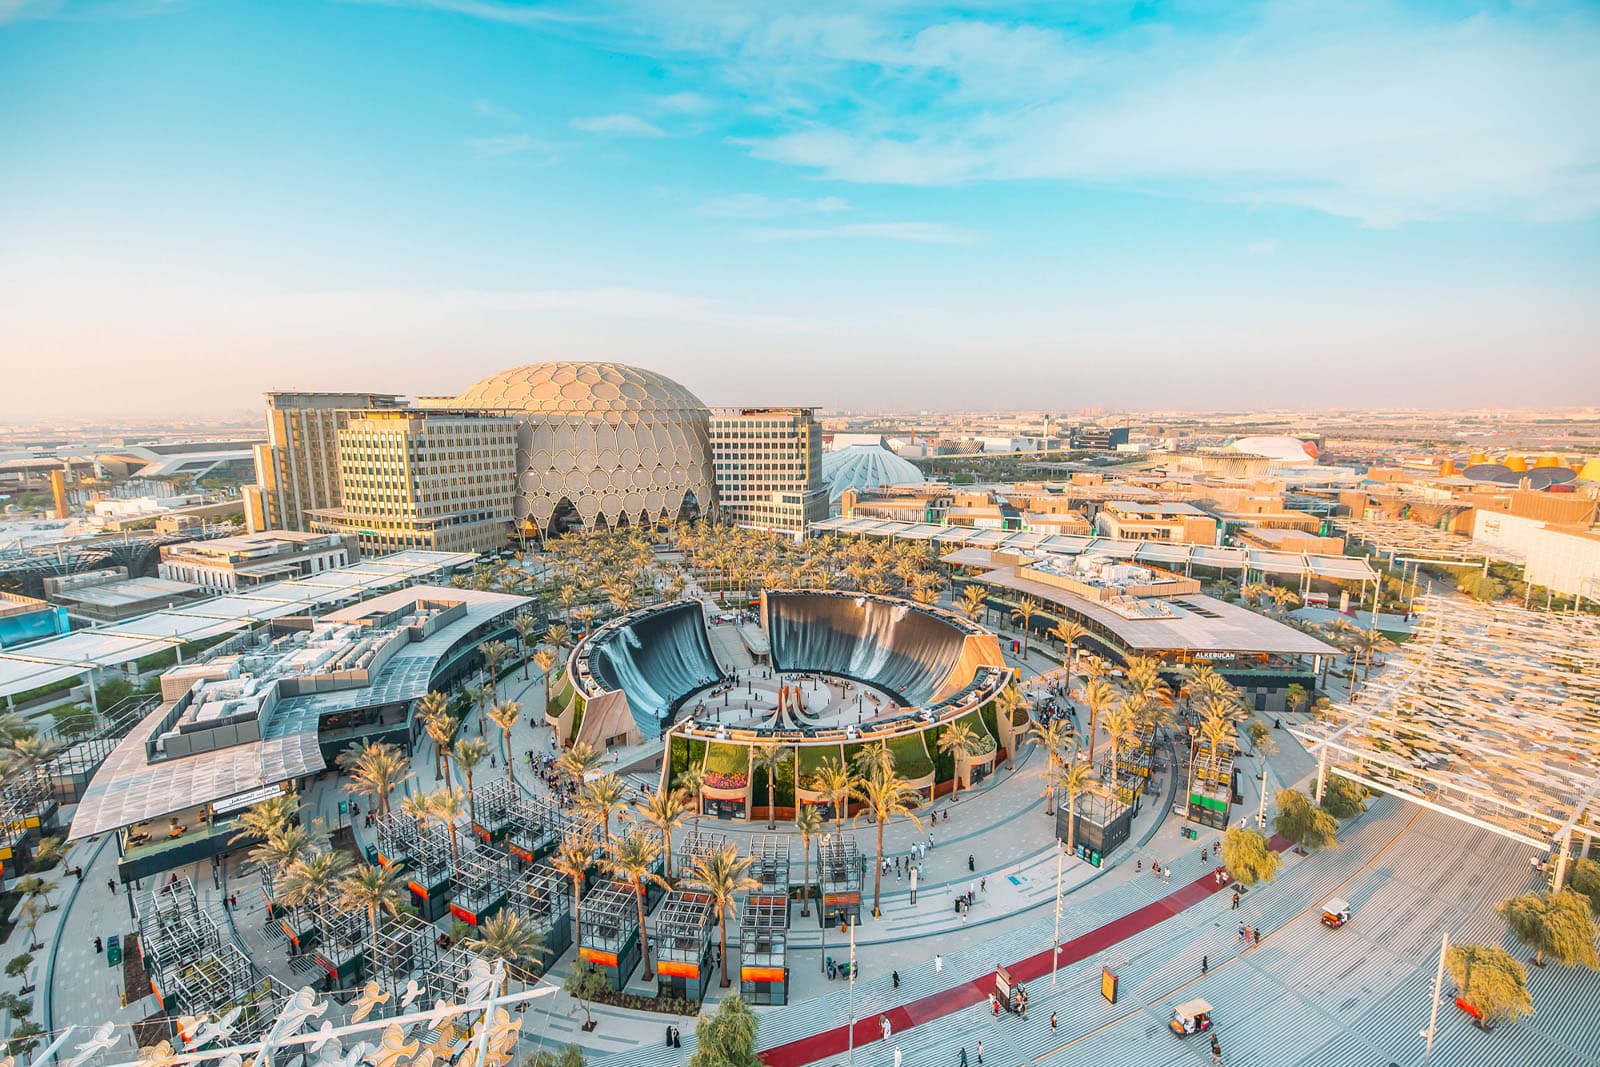 Dubai Expo 2020 welcomes visitors at the largest cultural